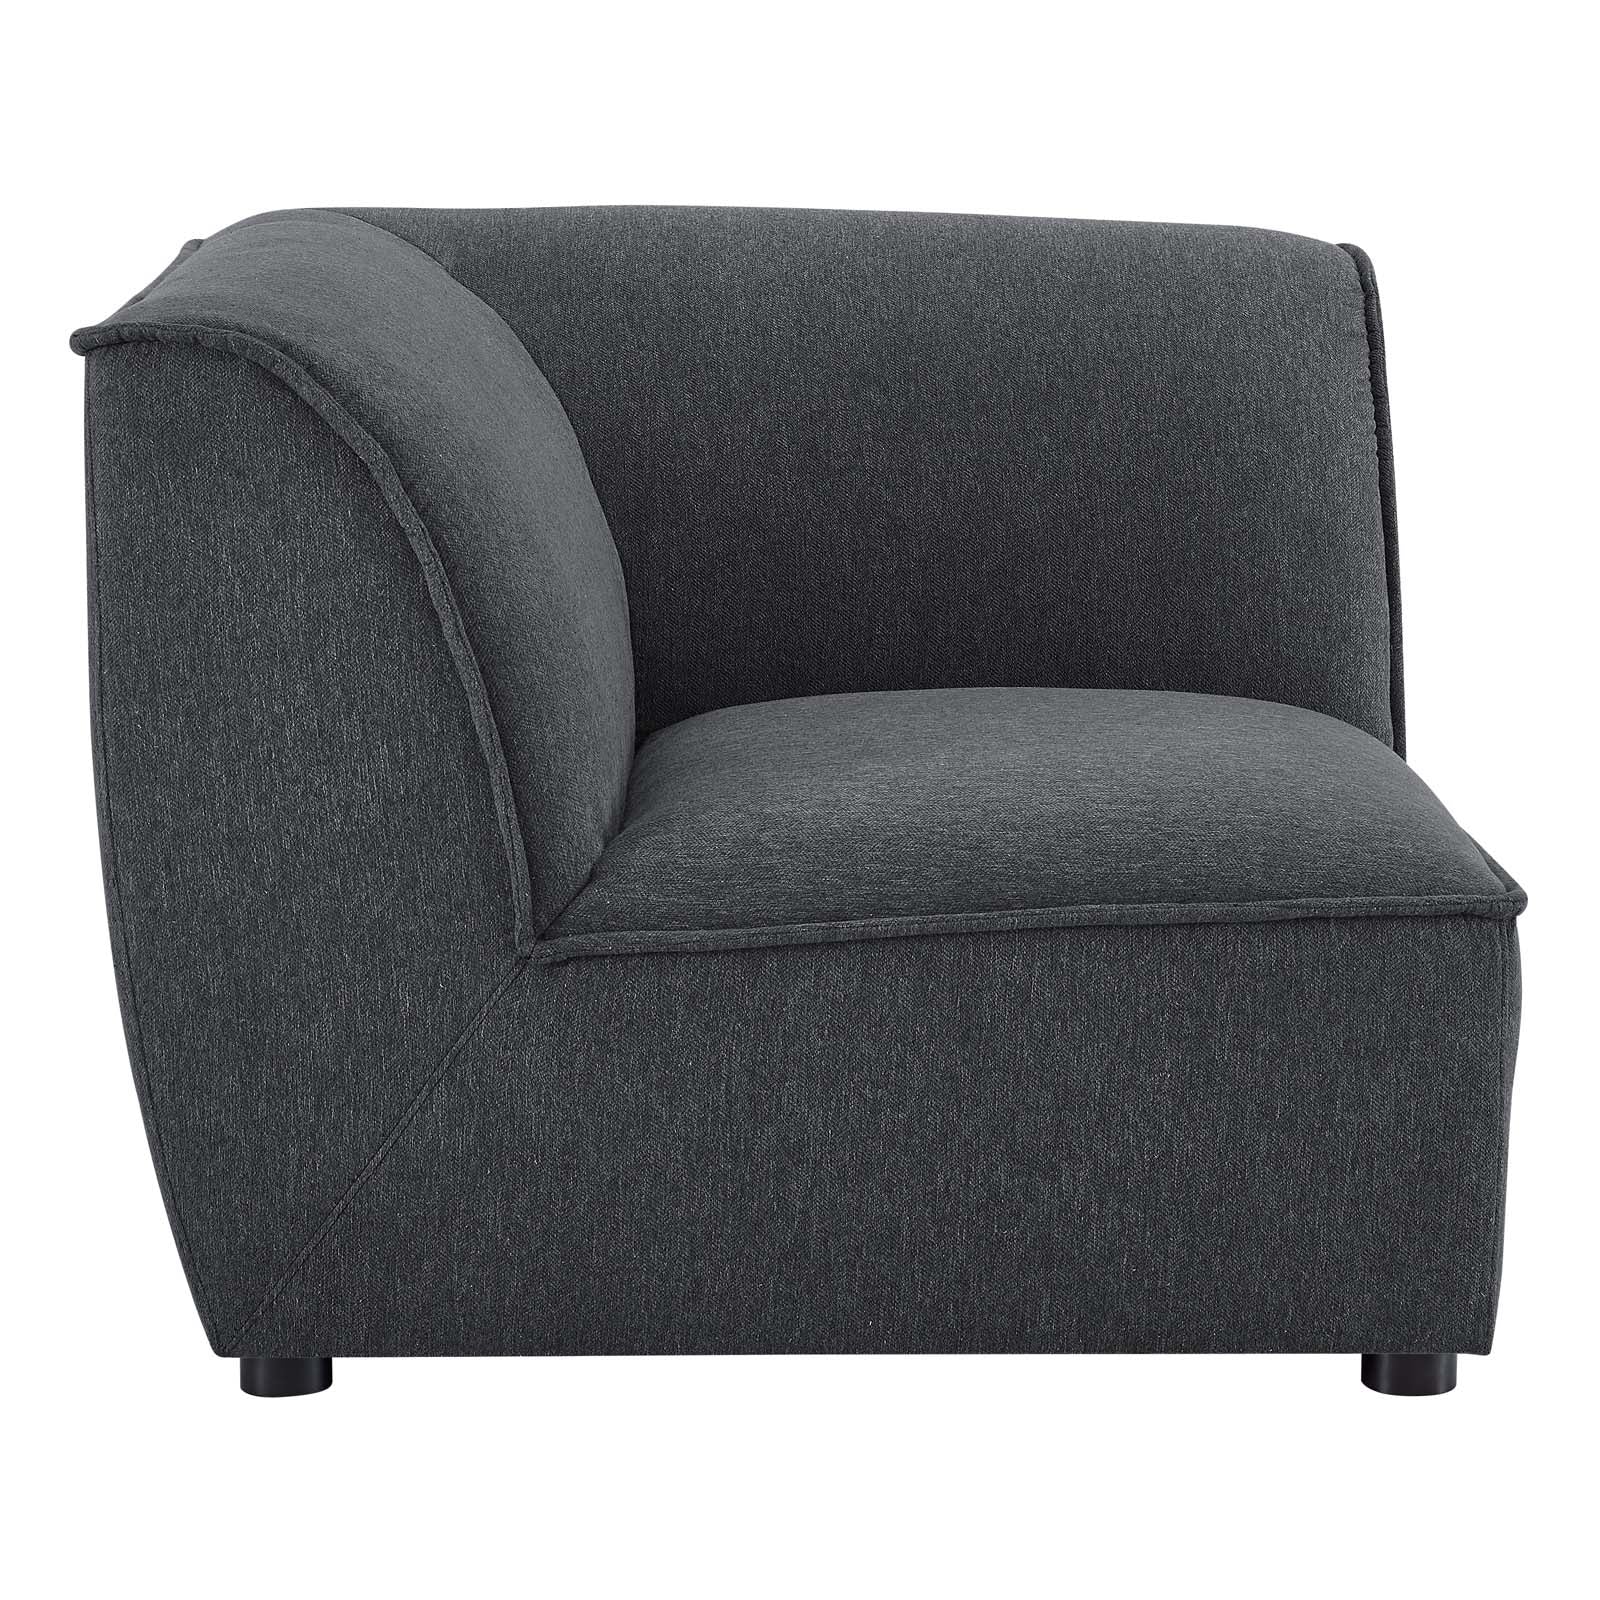 Comprise Corner Sectional Sofa Chair - East Shore Modern Home Furnishings